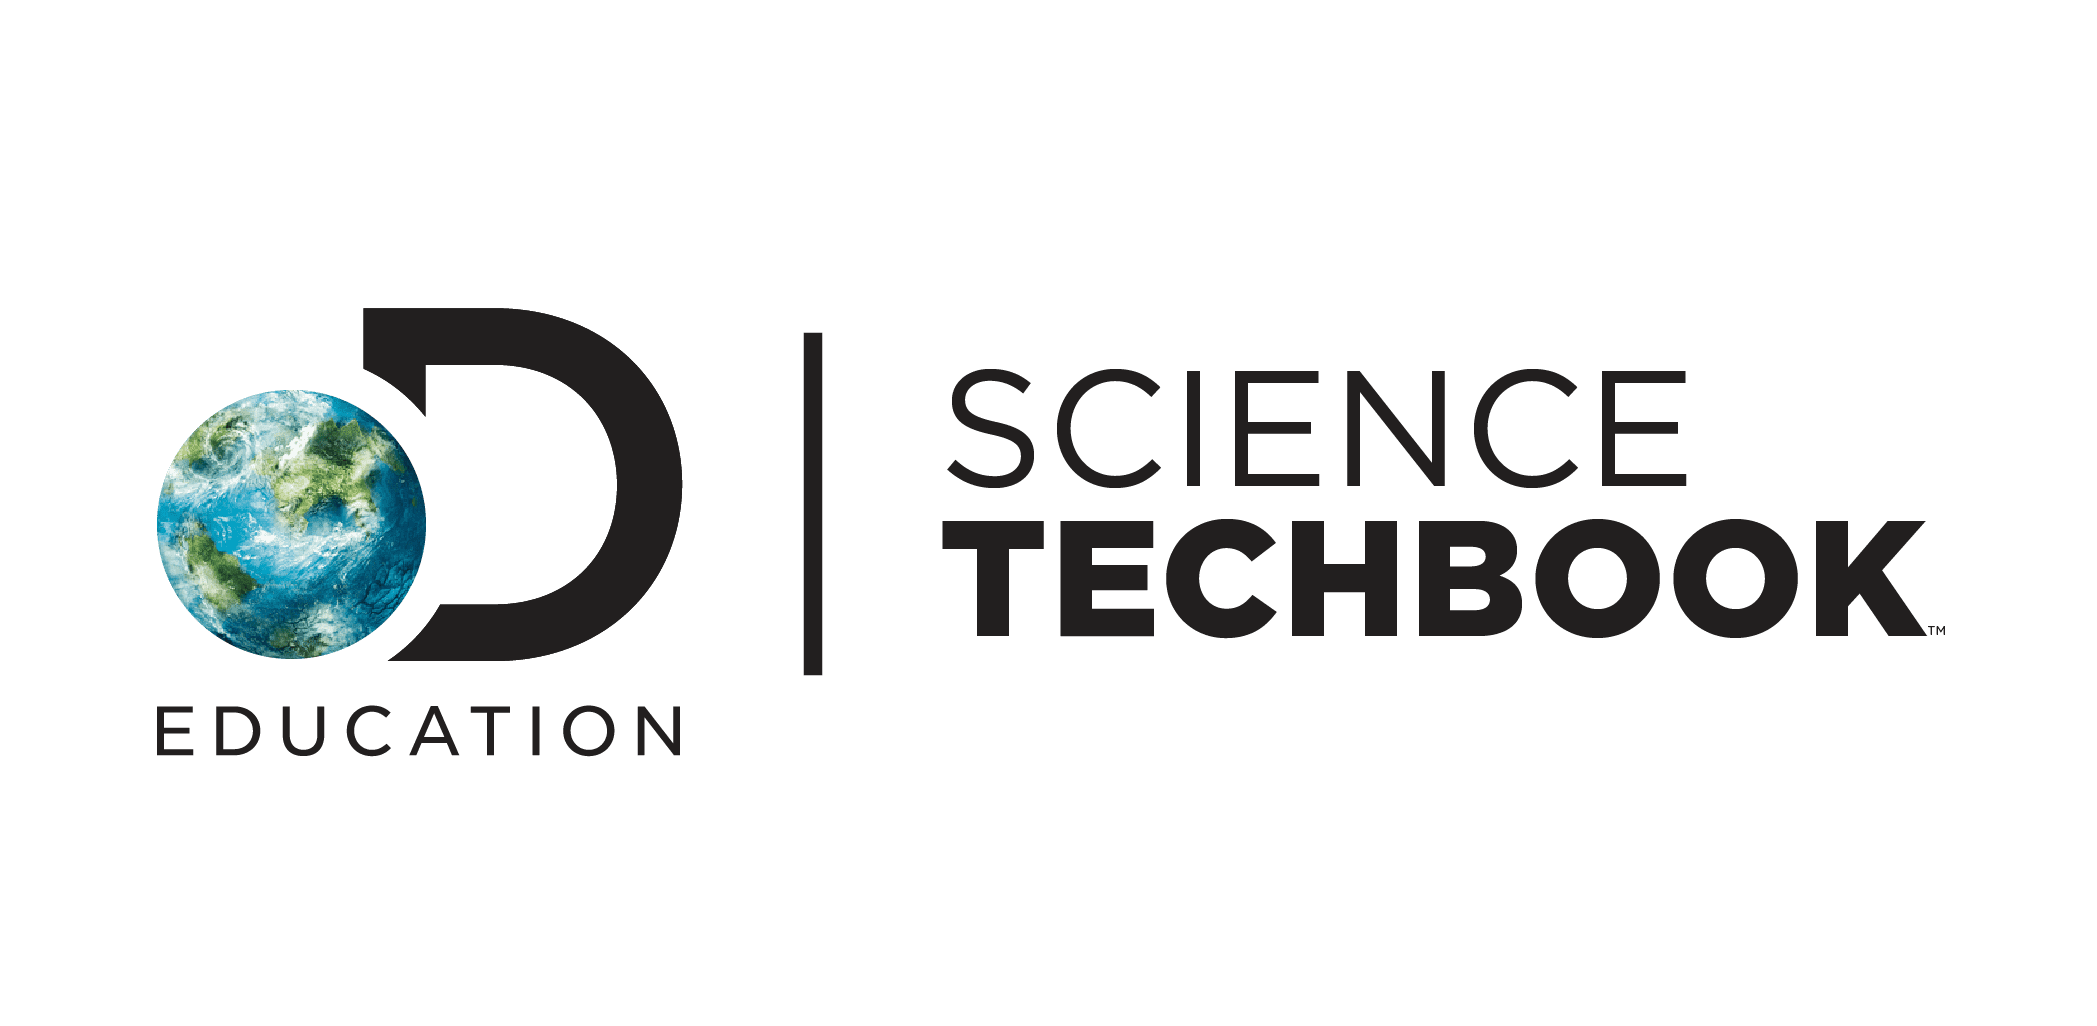 discovery education science techbook logo